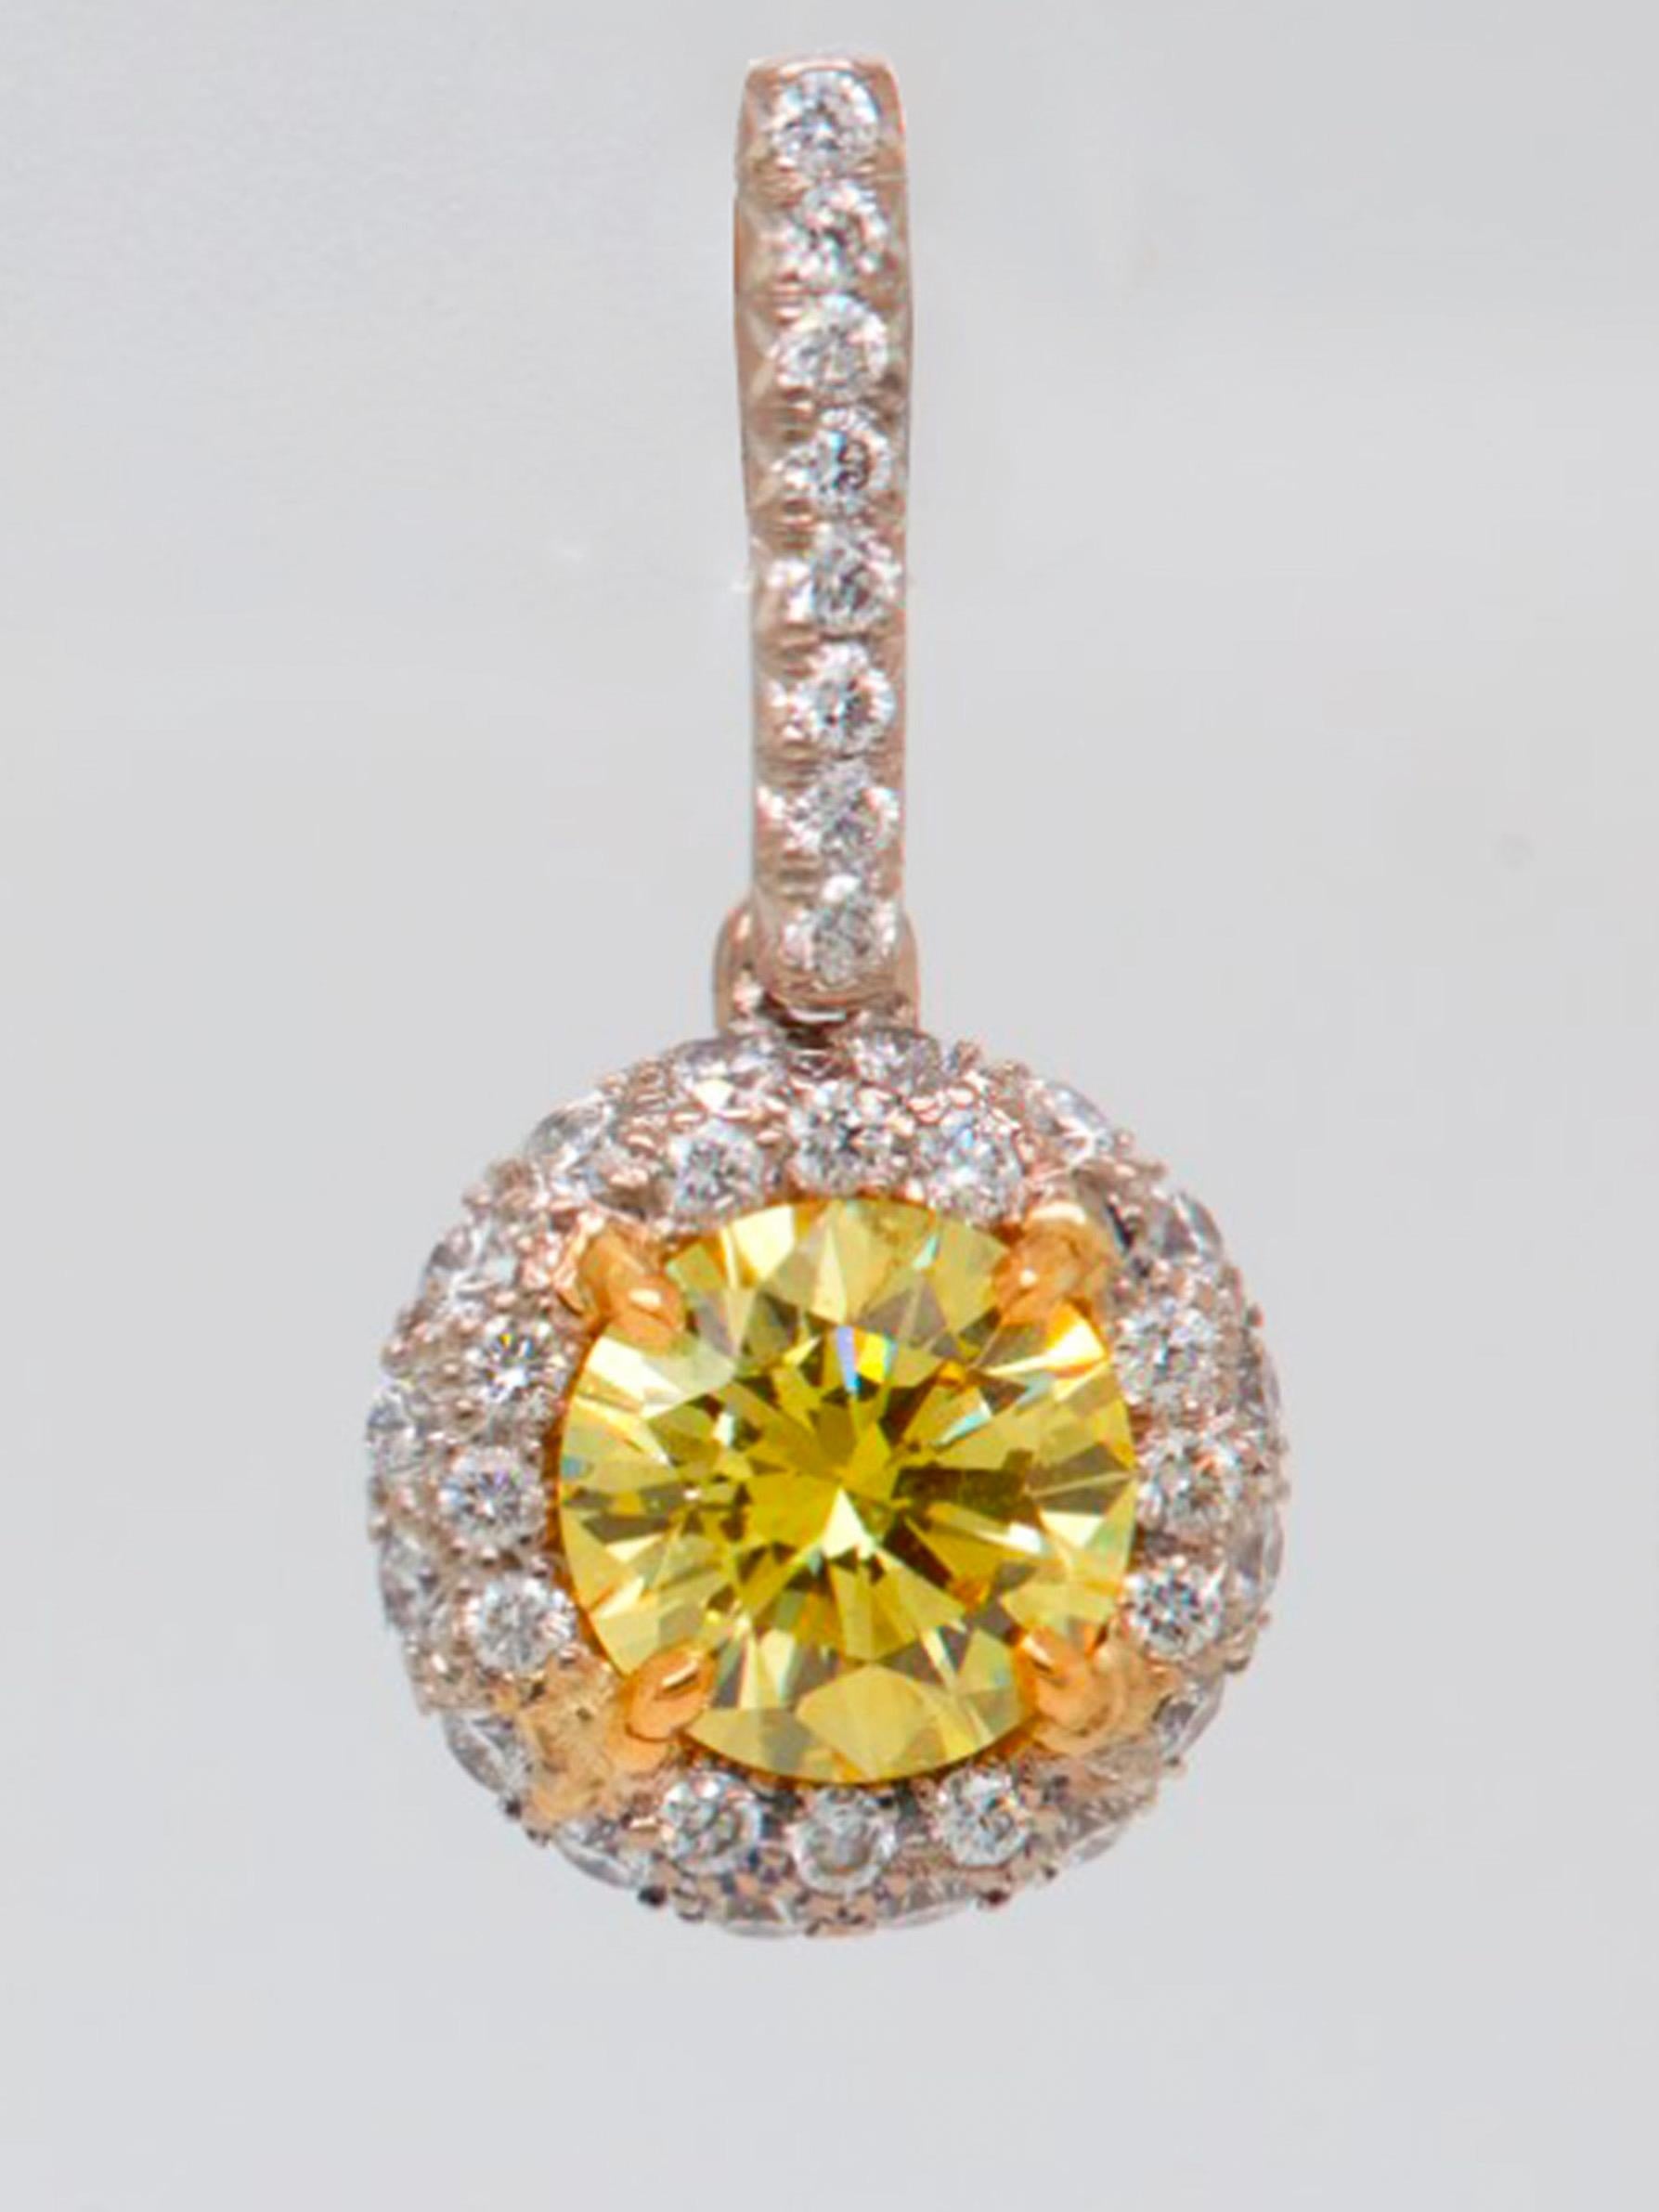 Round Cut 2.09 Carat Fancy Vivid Yellow Diamond Drop Earrings with Halo, GIA Report For Sale